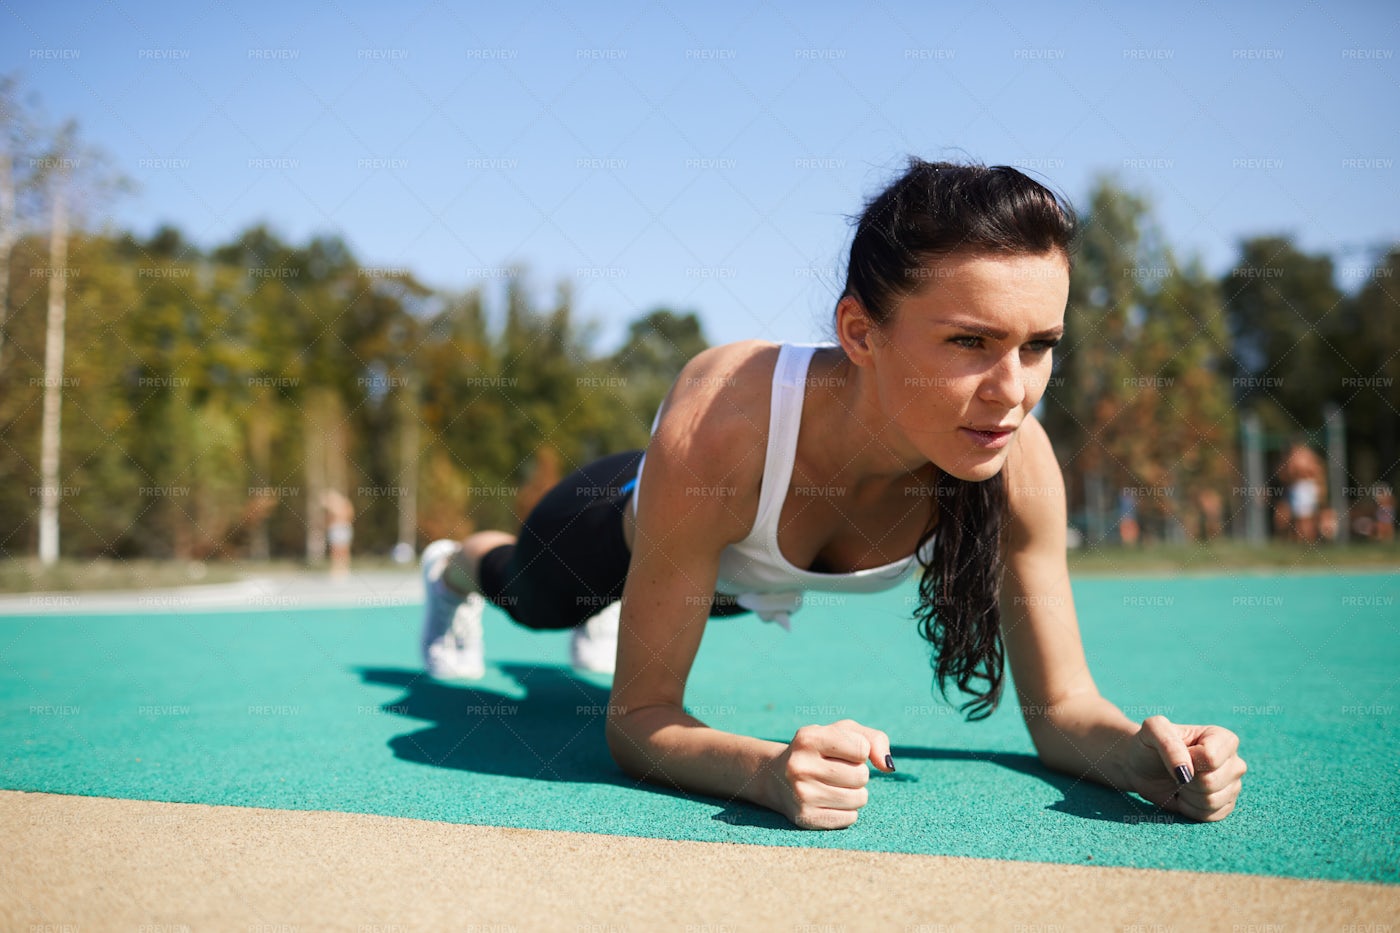 Concentrated Lady Doing Plank At Stadium: Stock Photos